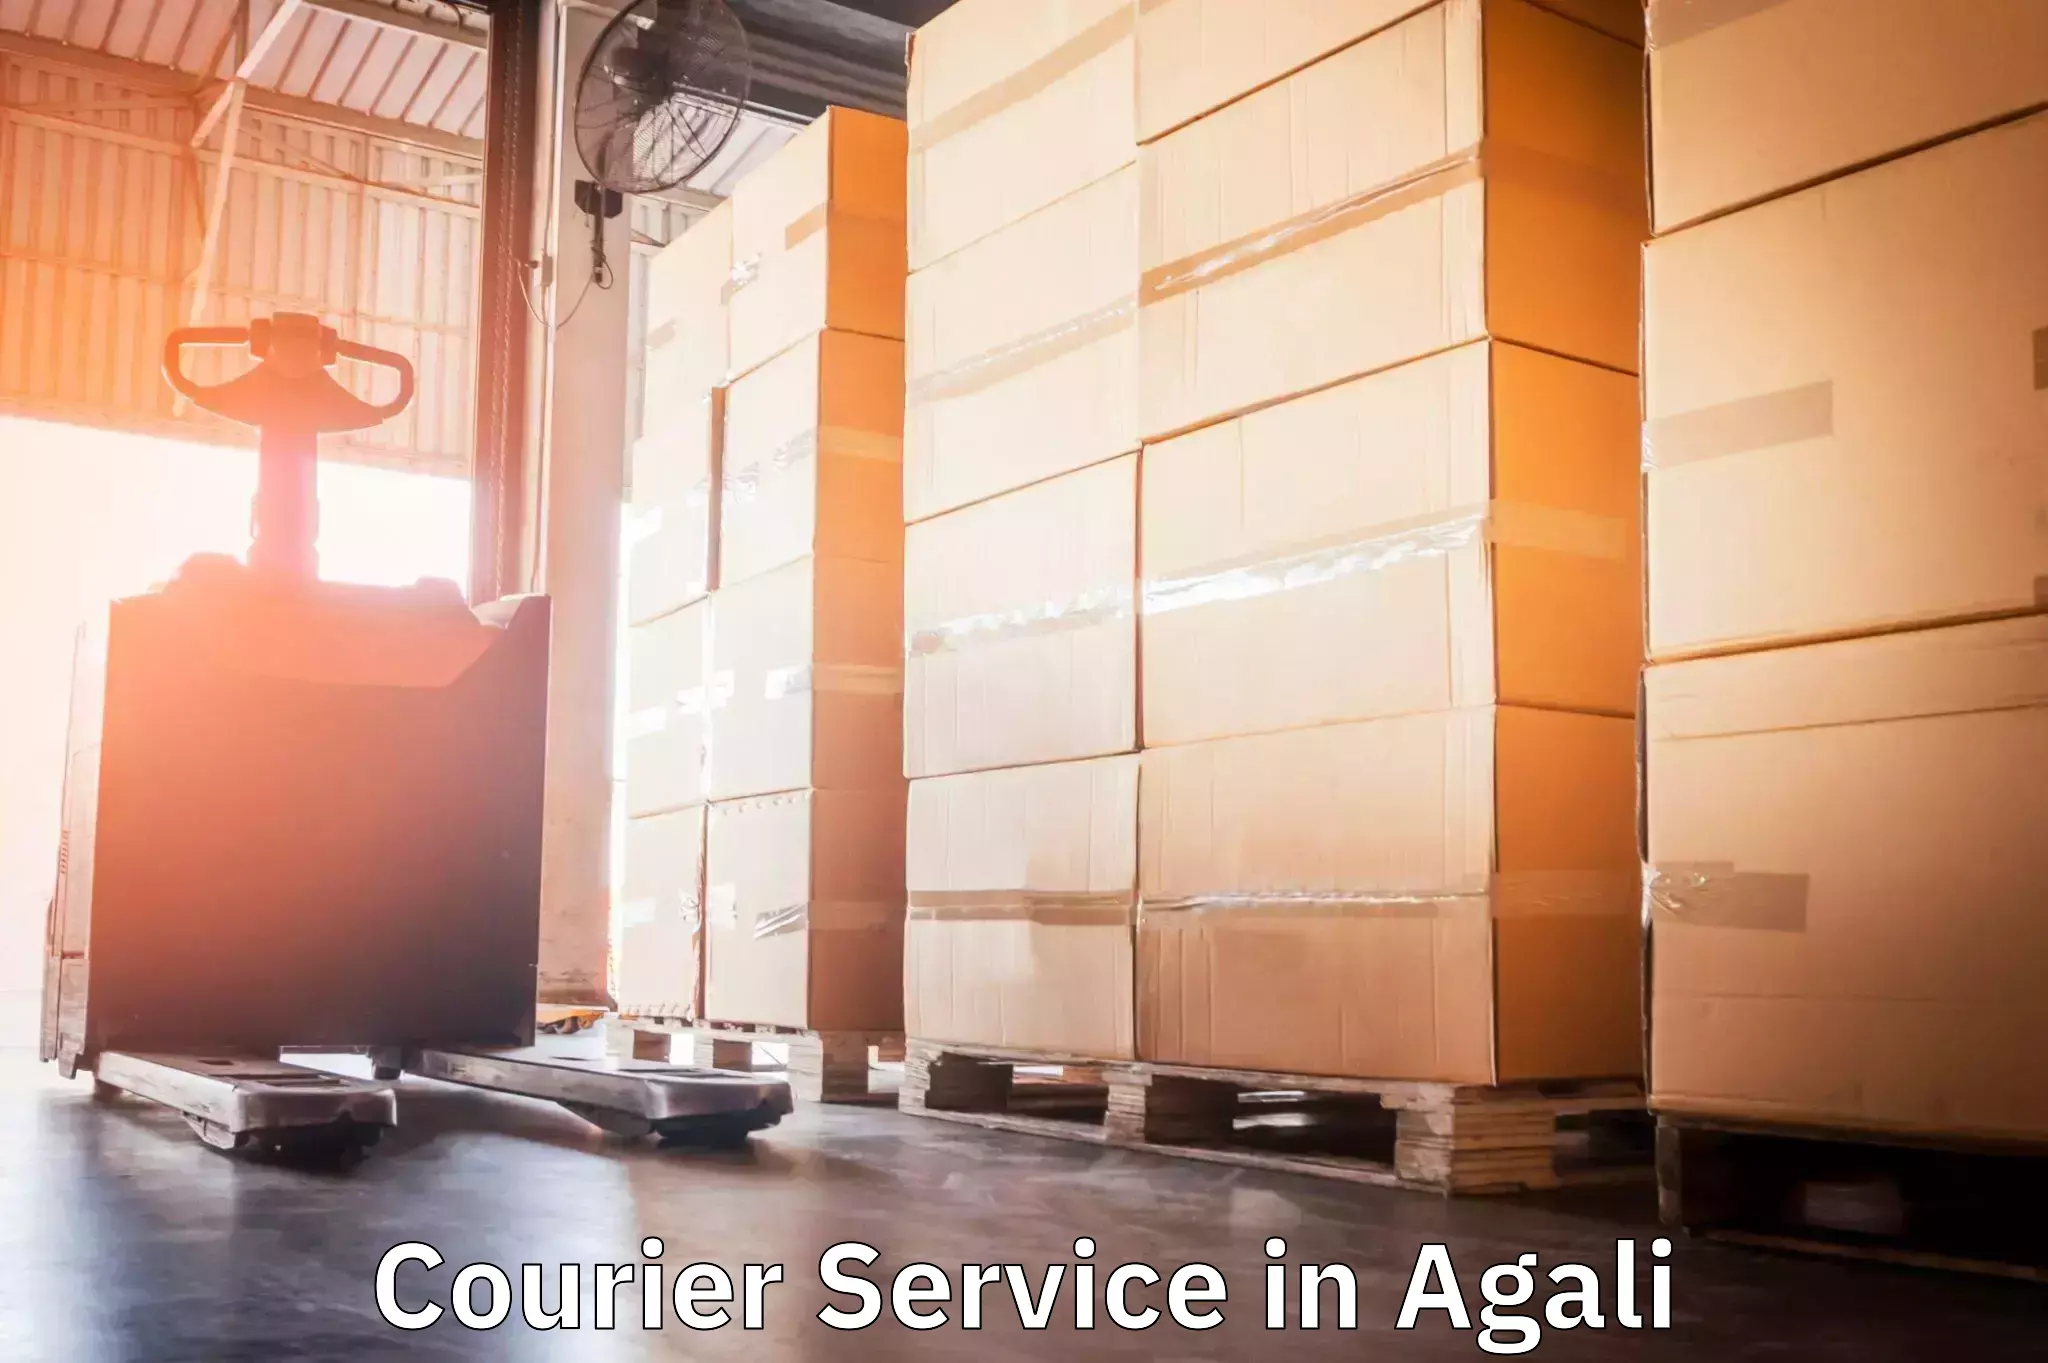 24-hour courier service in Agali